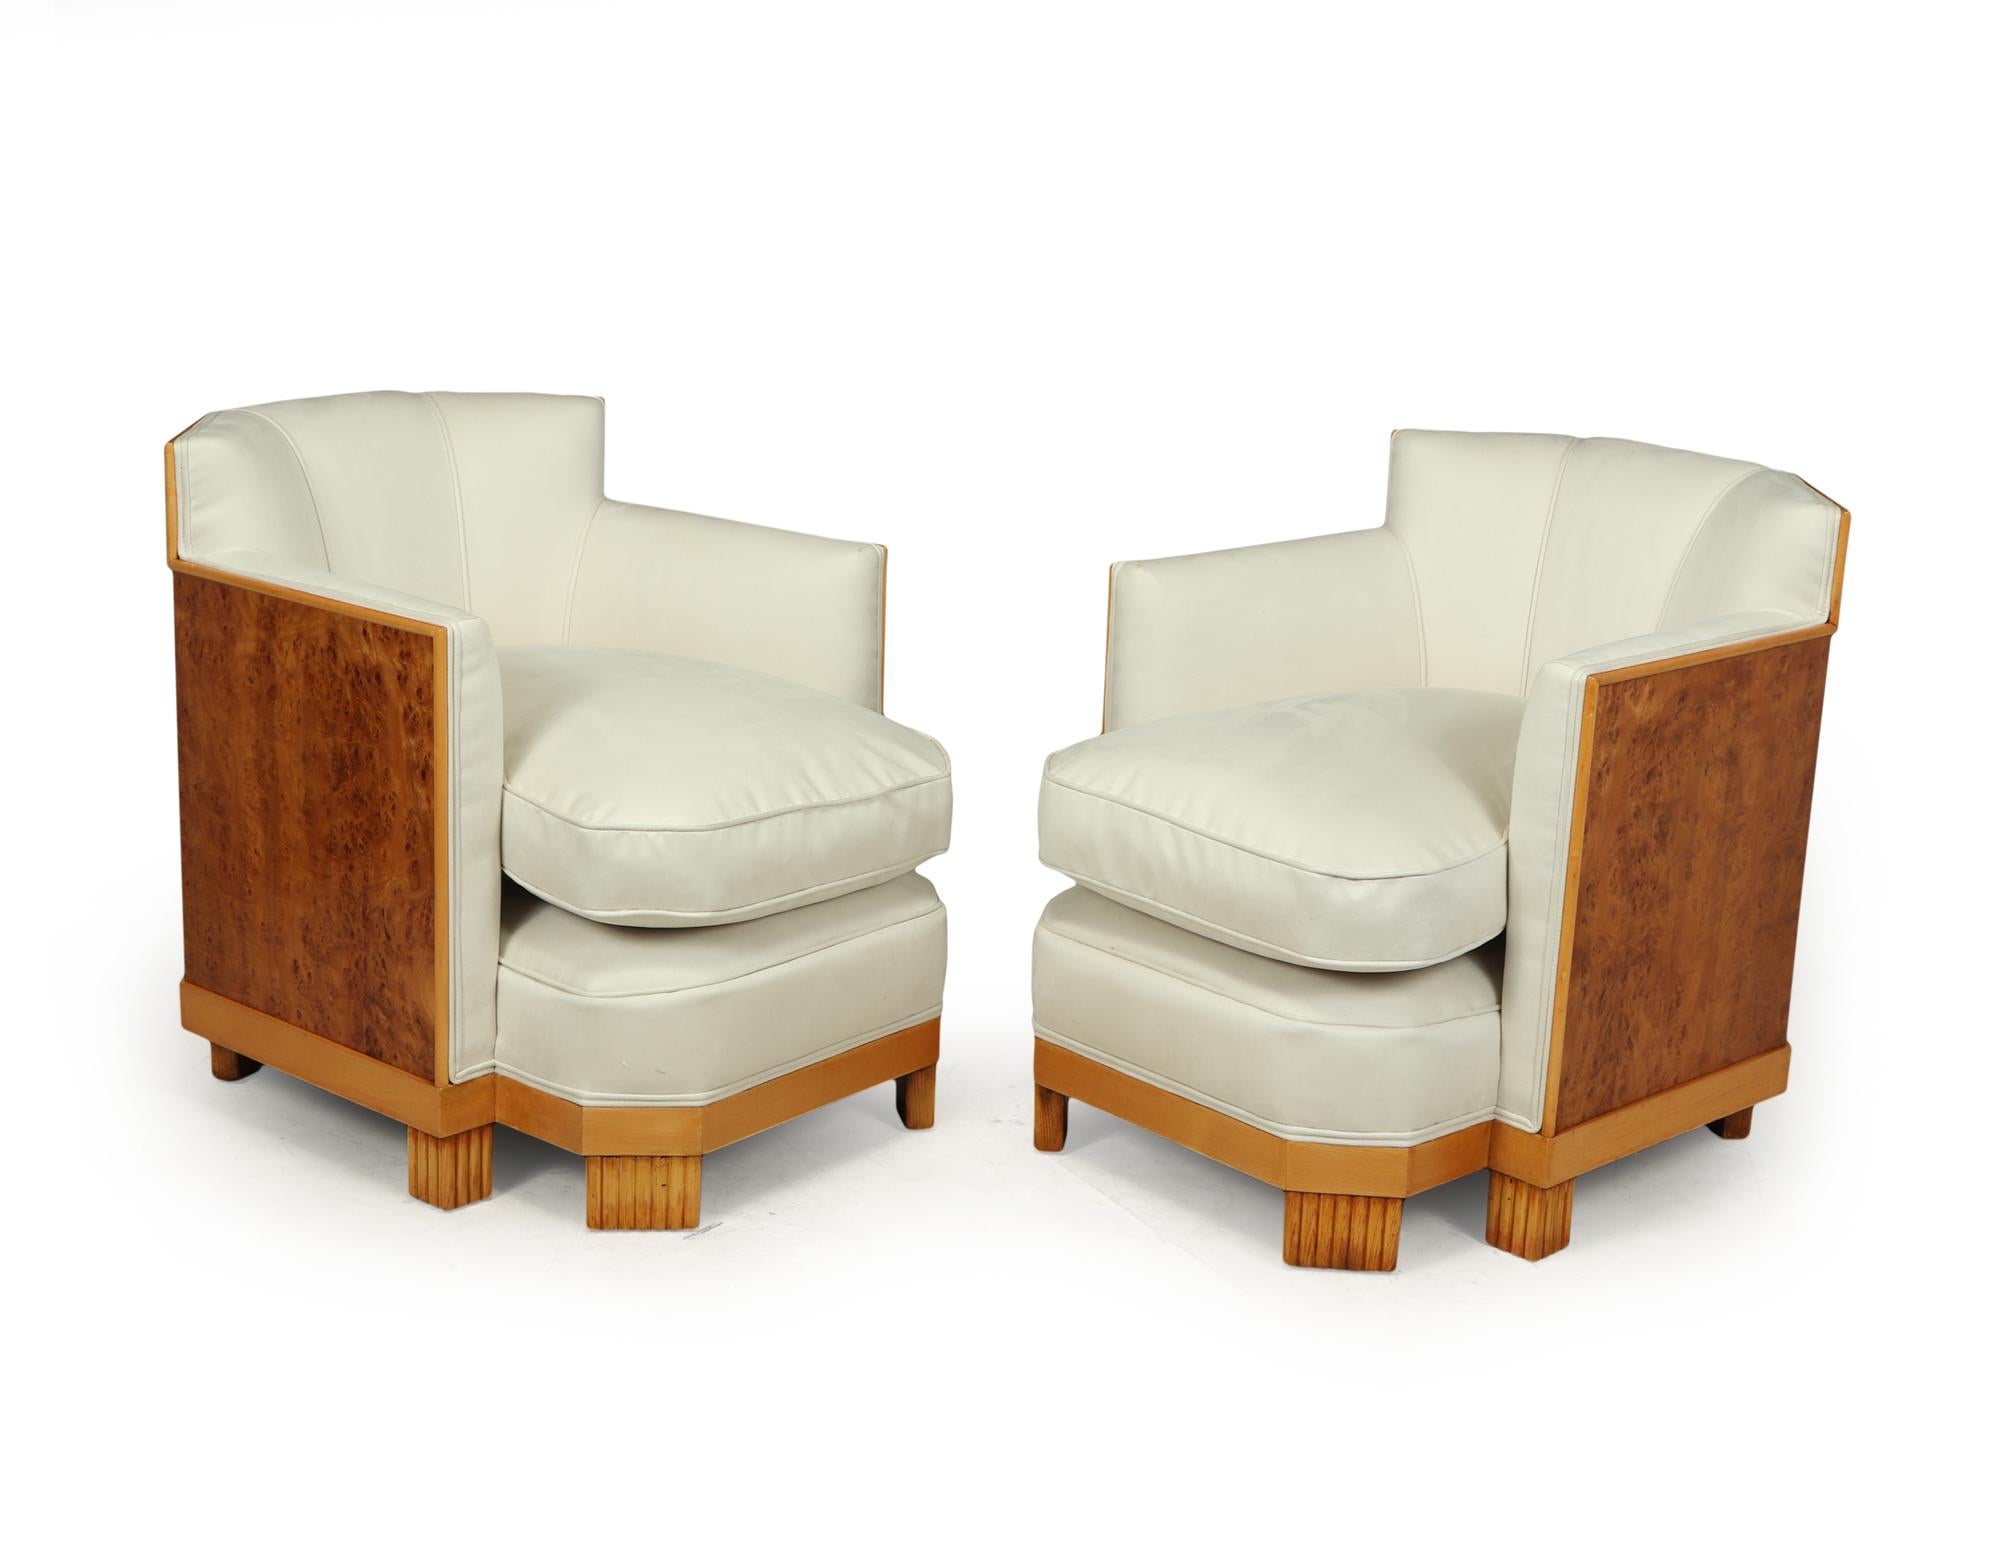 A Stunning pair of deep seated armchairs with hexagonal shaped backs having burr thuja veneers with boxwood detail, reeded feet and fully upholstered and covered in very high quality Italian Faux Suede, the cushion is down filled and deep making the